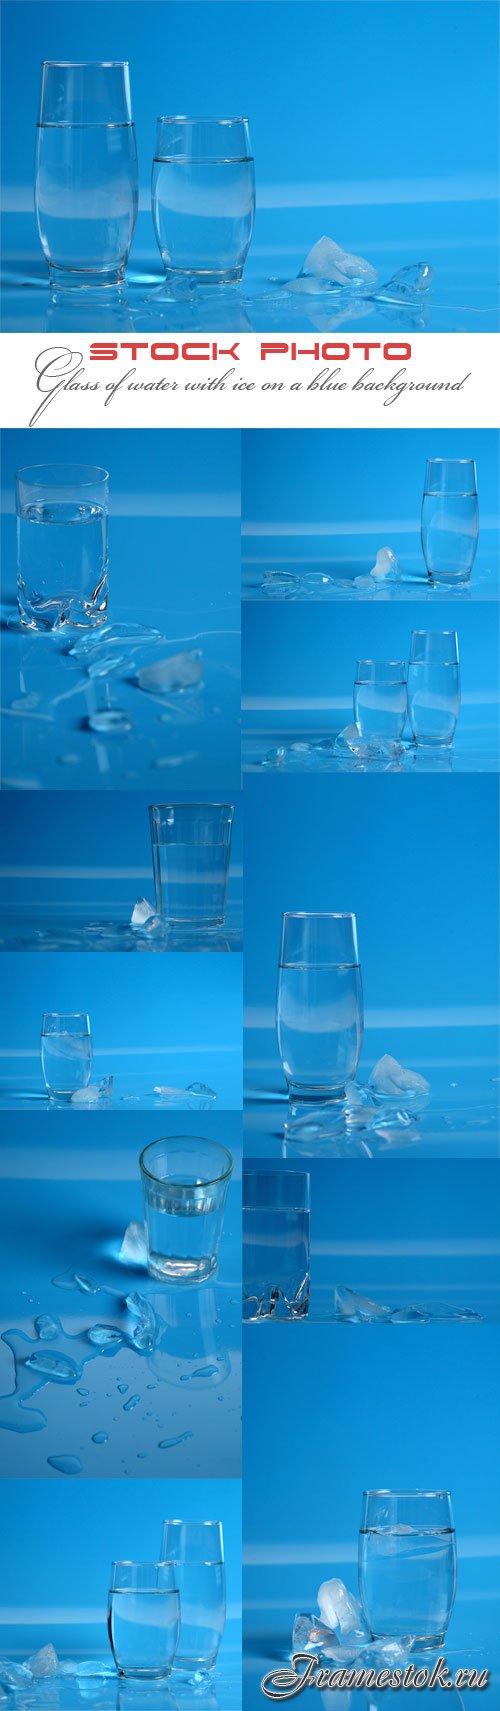 Glass of water with ice on a blue background